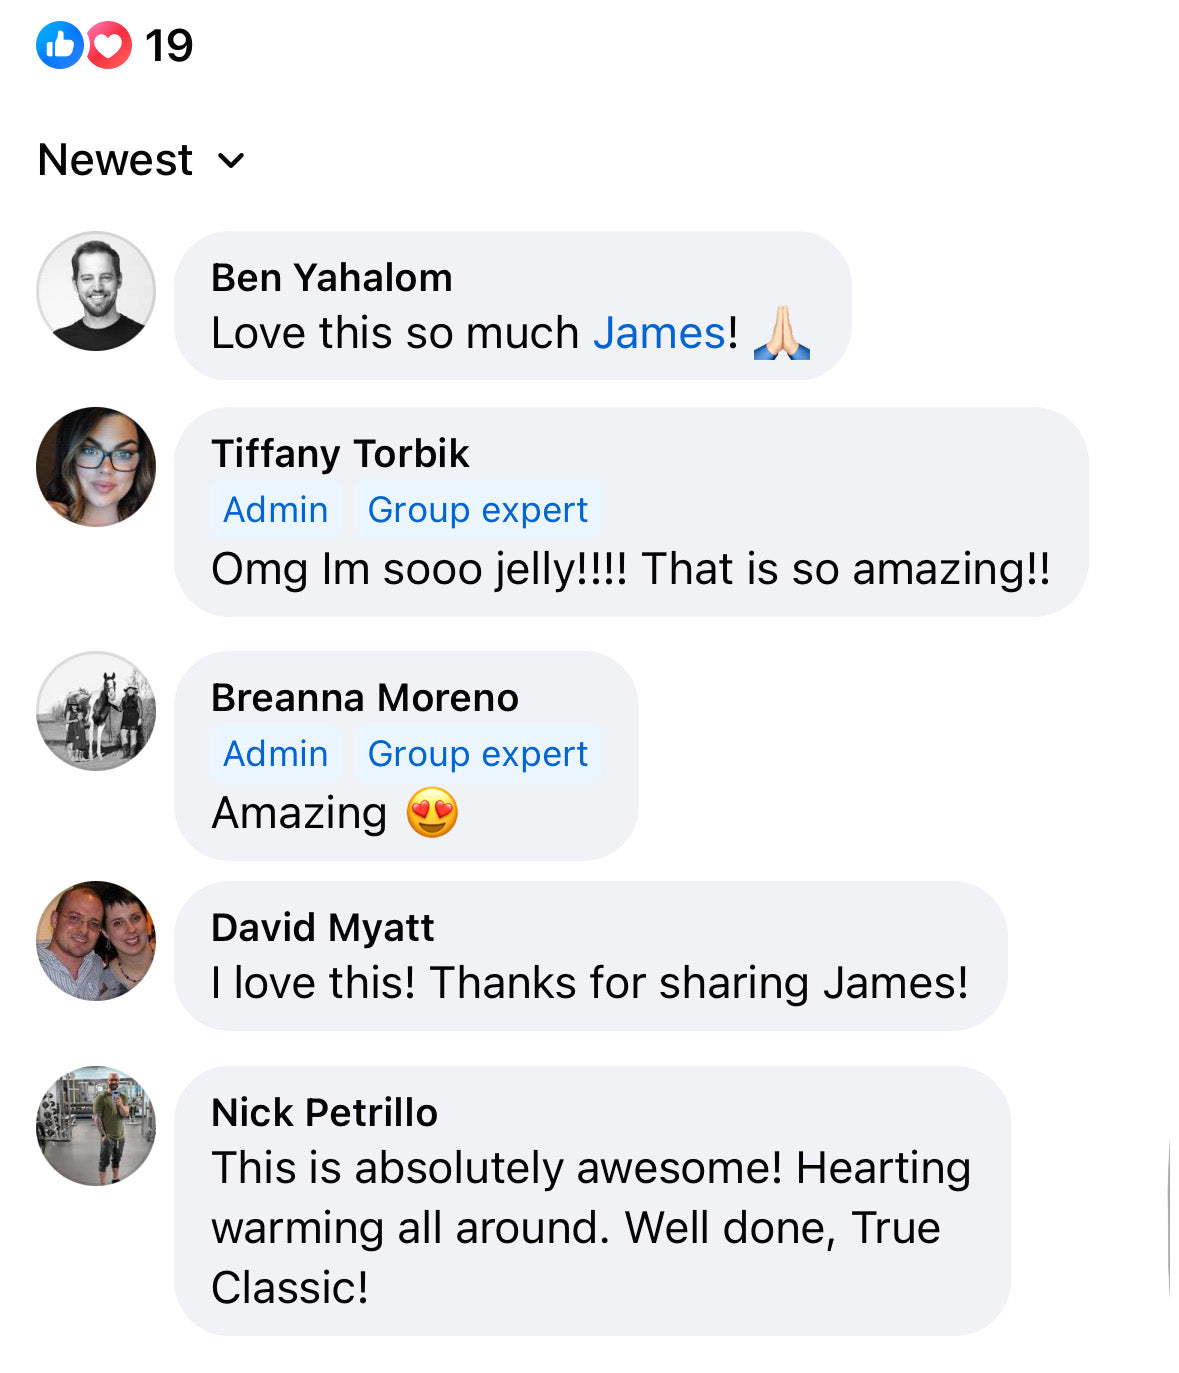 Comments expressing admiration for a shared post by James, with likes and emojis.